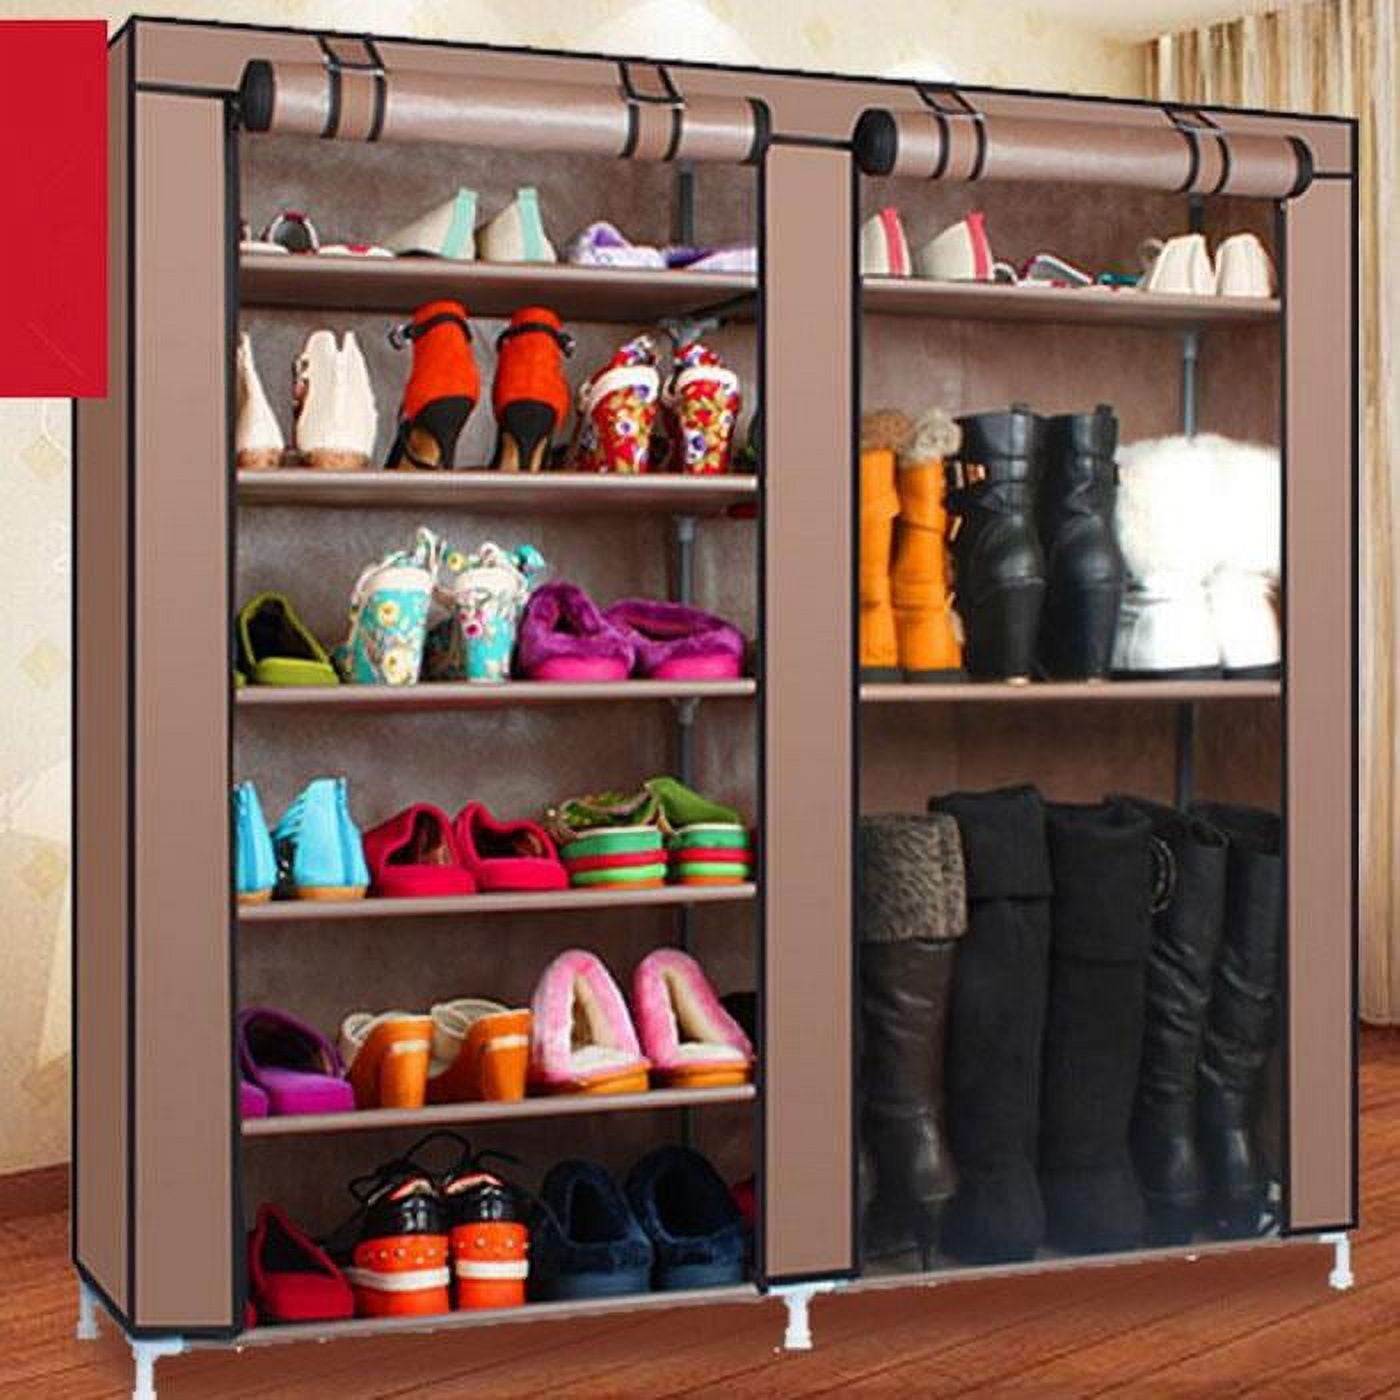 27 Pairs Portable Shoe Rack Storage Organizer 6 Tiers Boot Rack Shelf for Closet with Dustproof Cover, Size: 9 Lattices, Gray